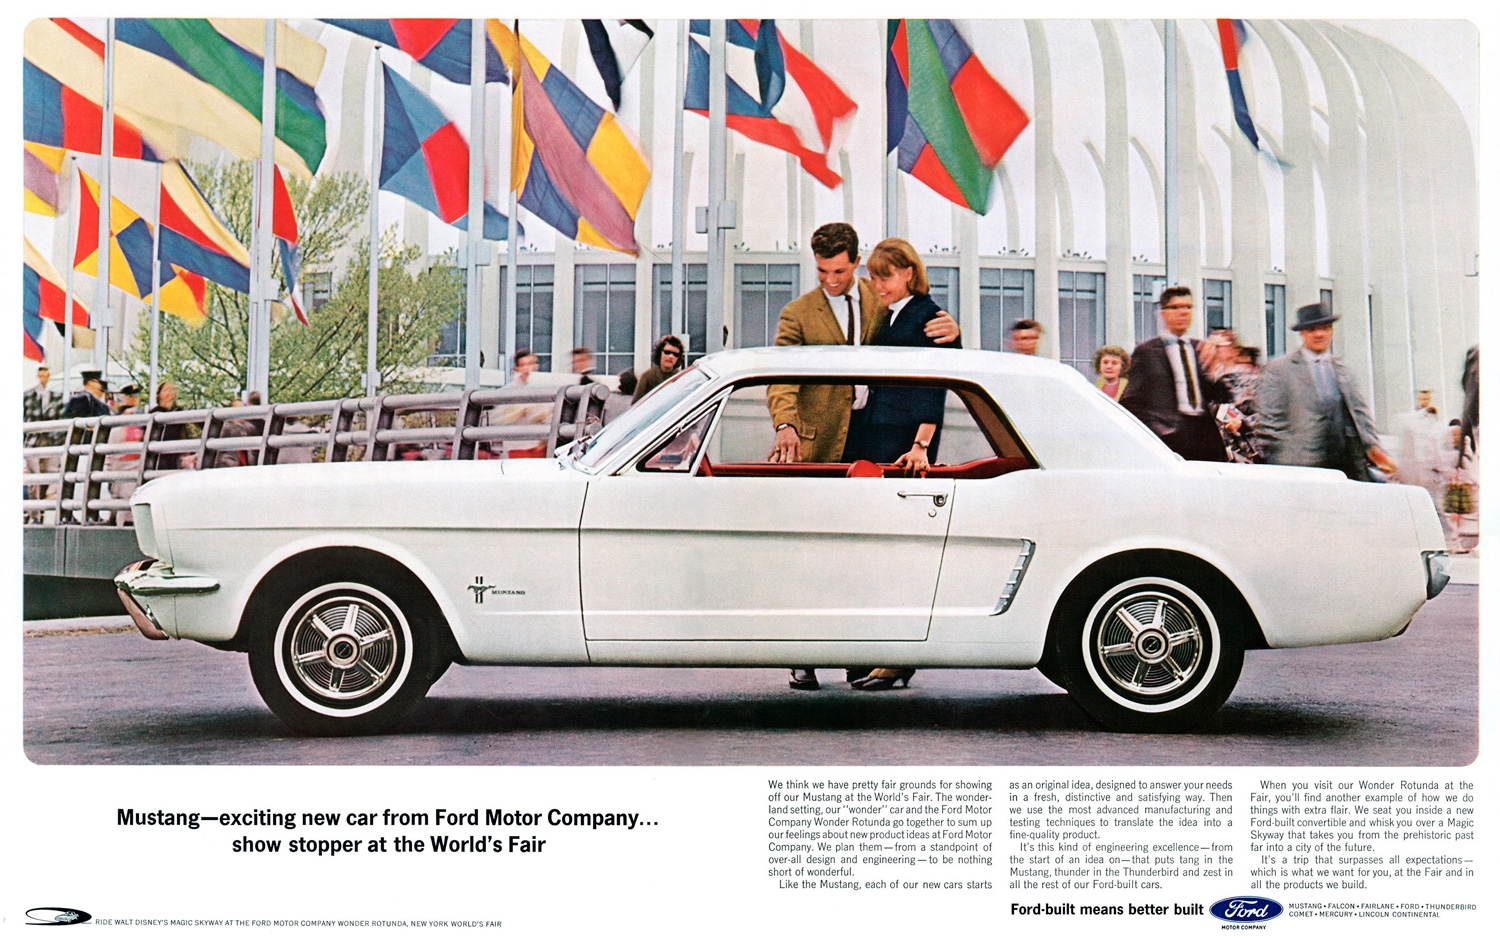 1964 Mustang Launch at the World's Fair